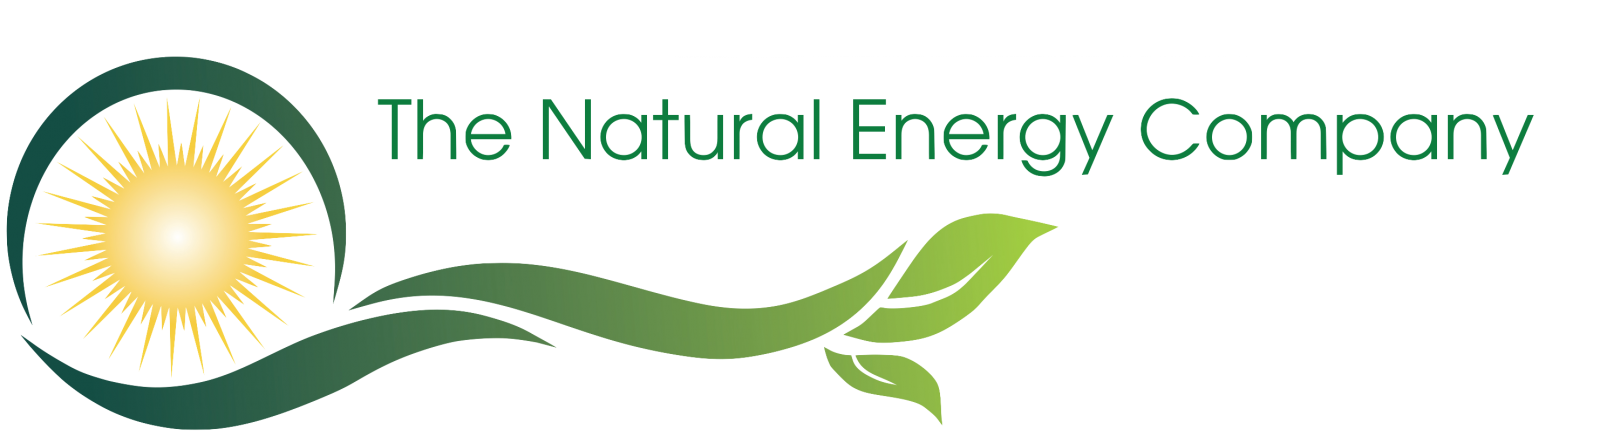 The Natural Energy Company  |  Start Your Survey